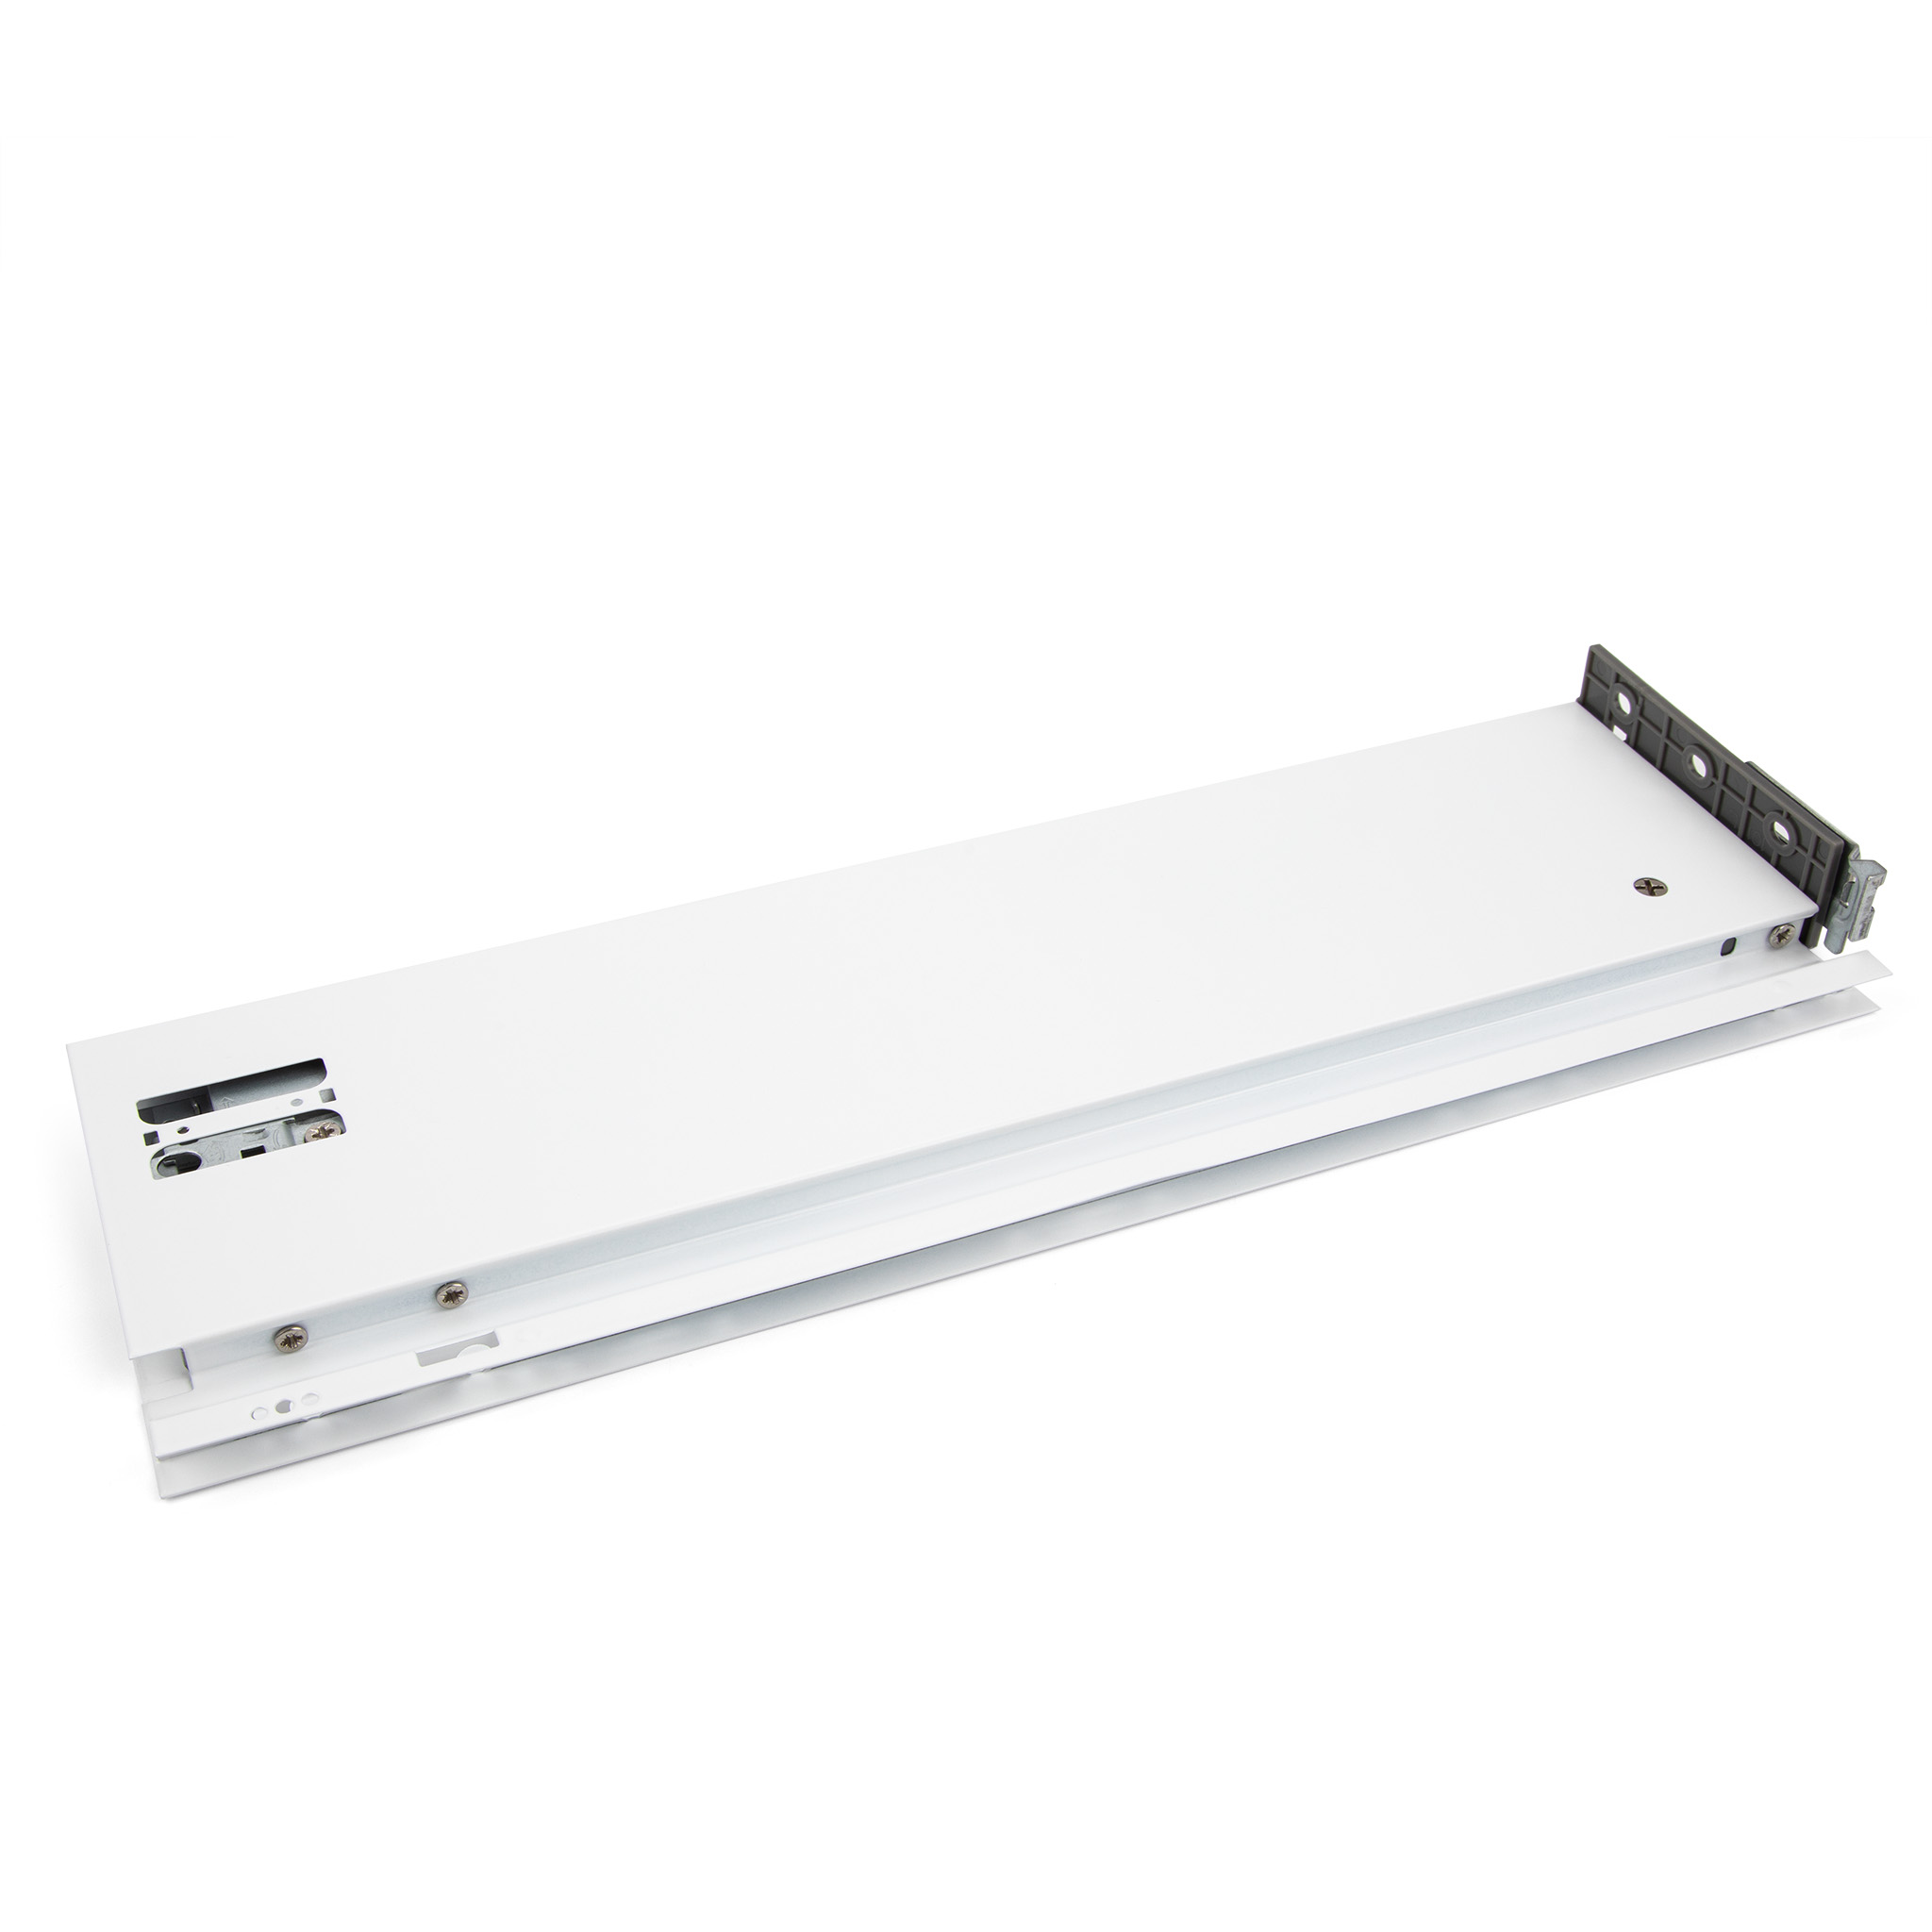 M-Series Fusion Side Wall, 400mm Length, 126mm Height, Lunar White